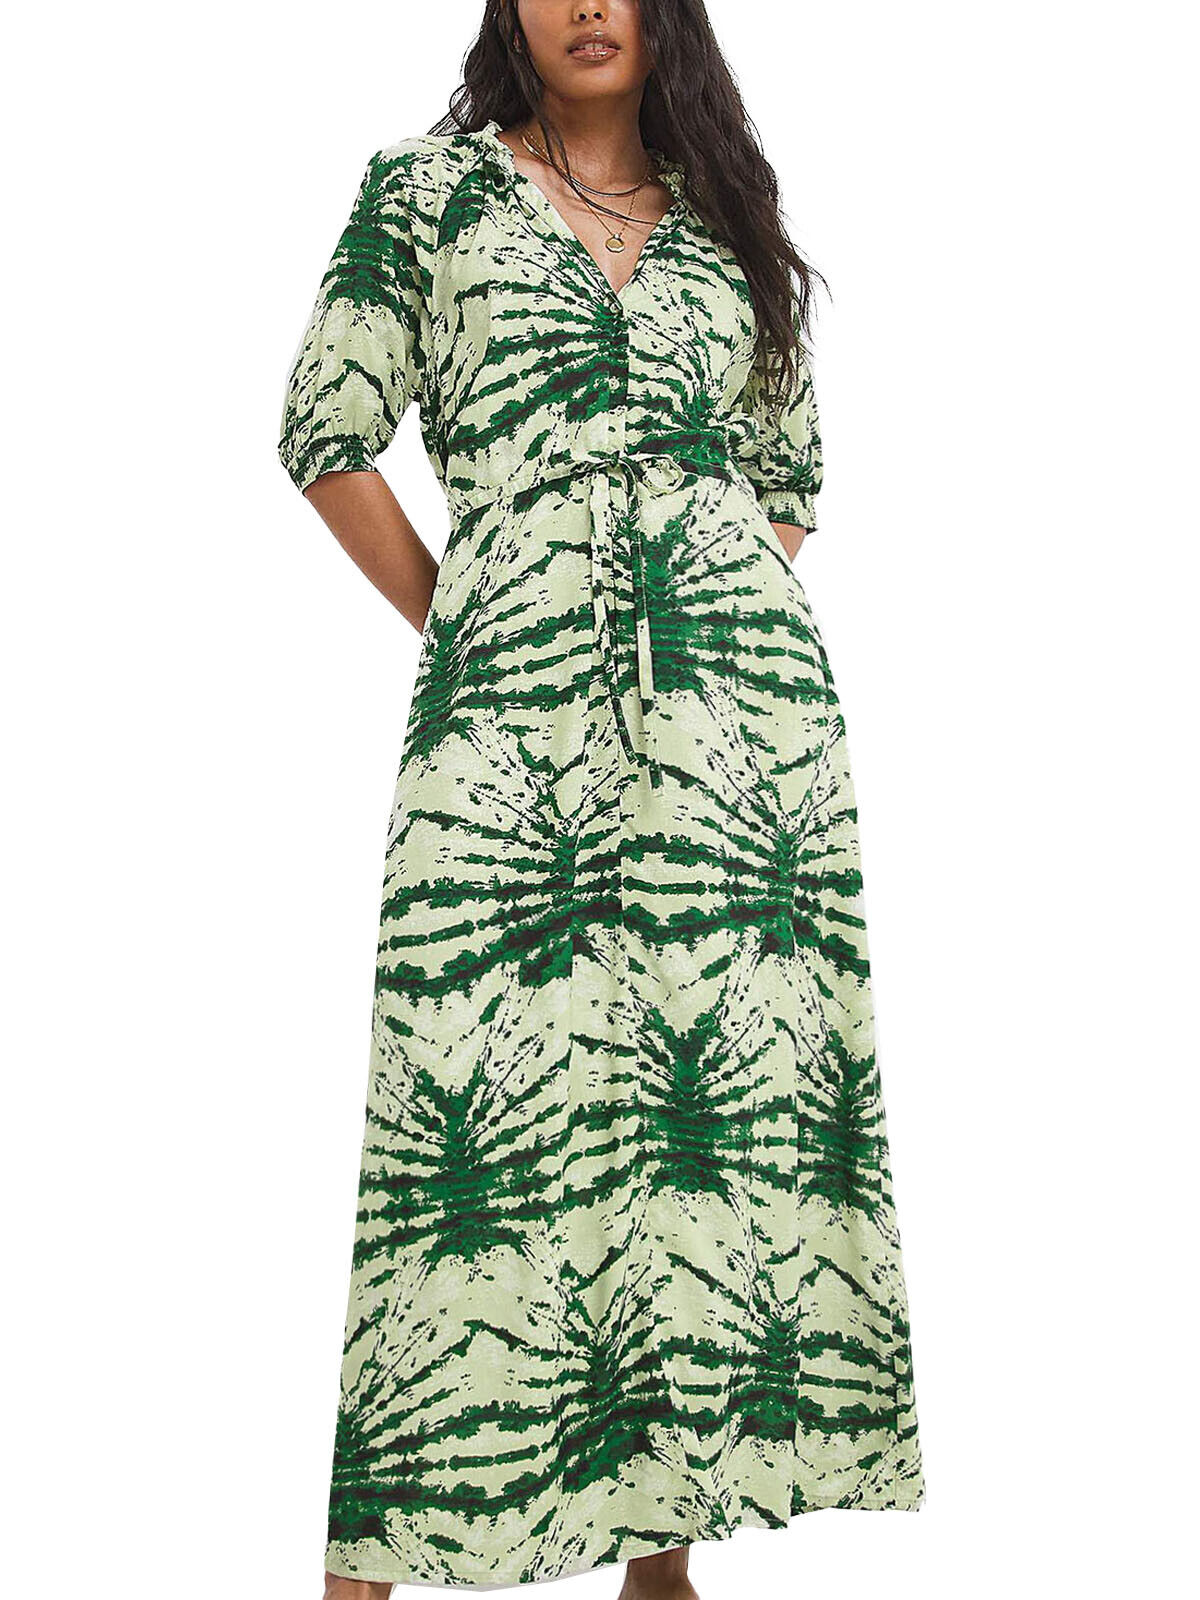 JD Williams Green Printed Open Neck Waisted Midi Dress 14, 18, 20, 24, 26, 28